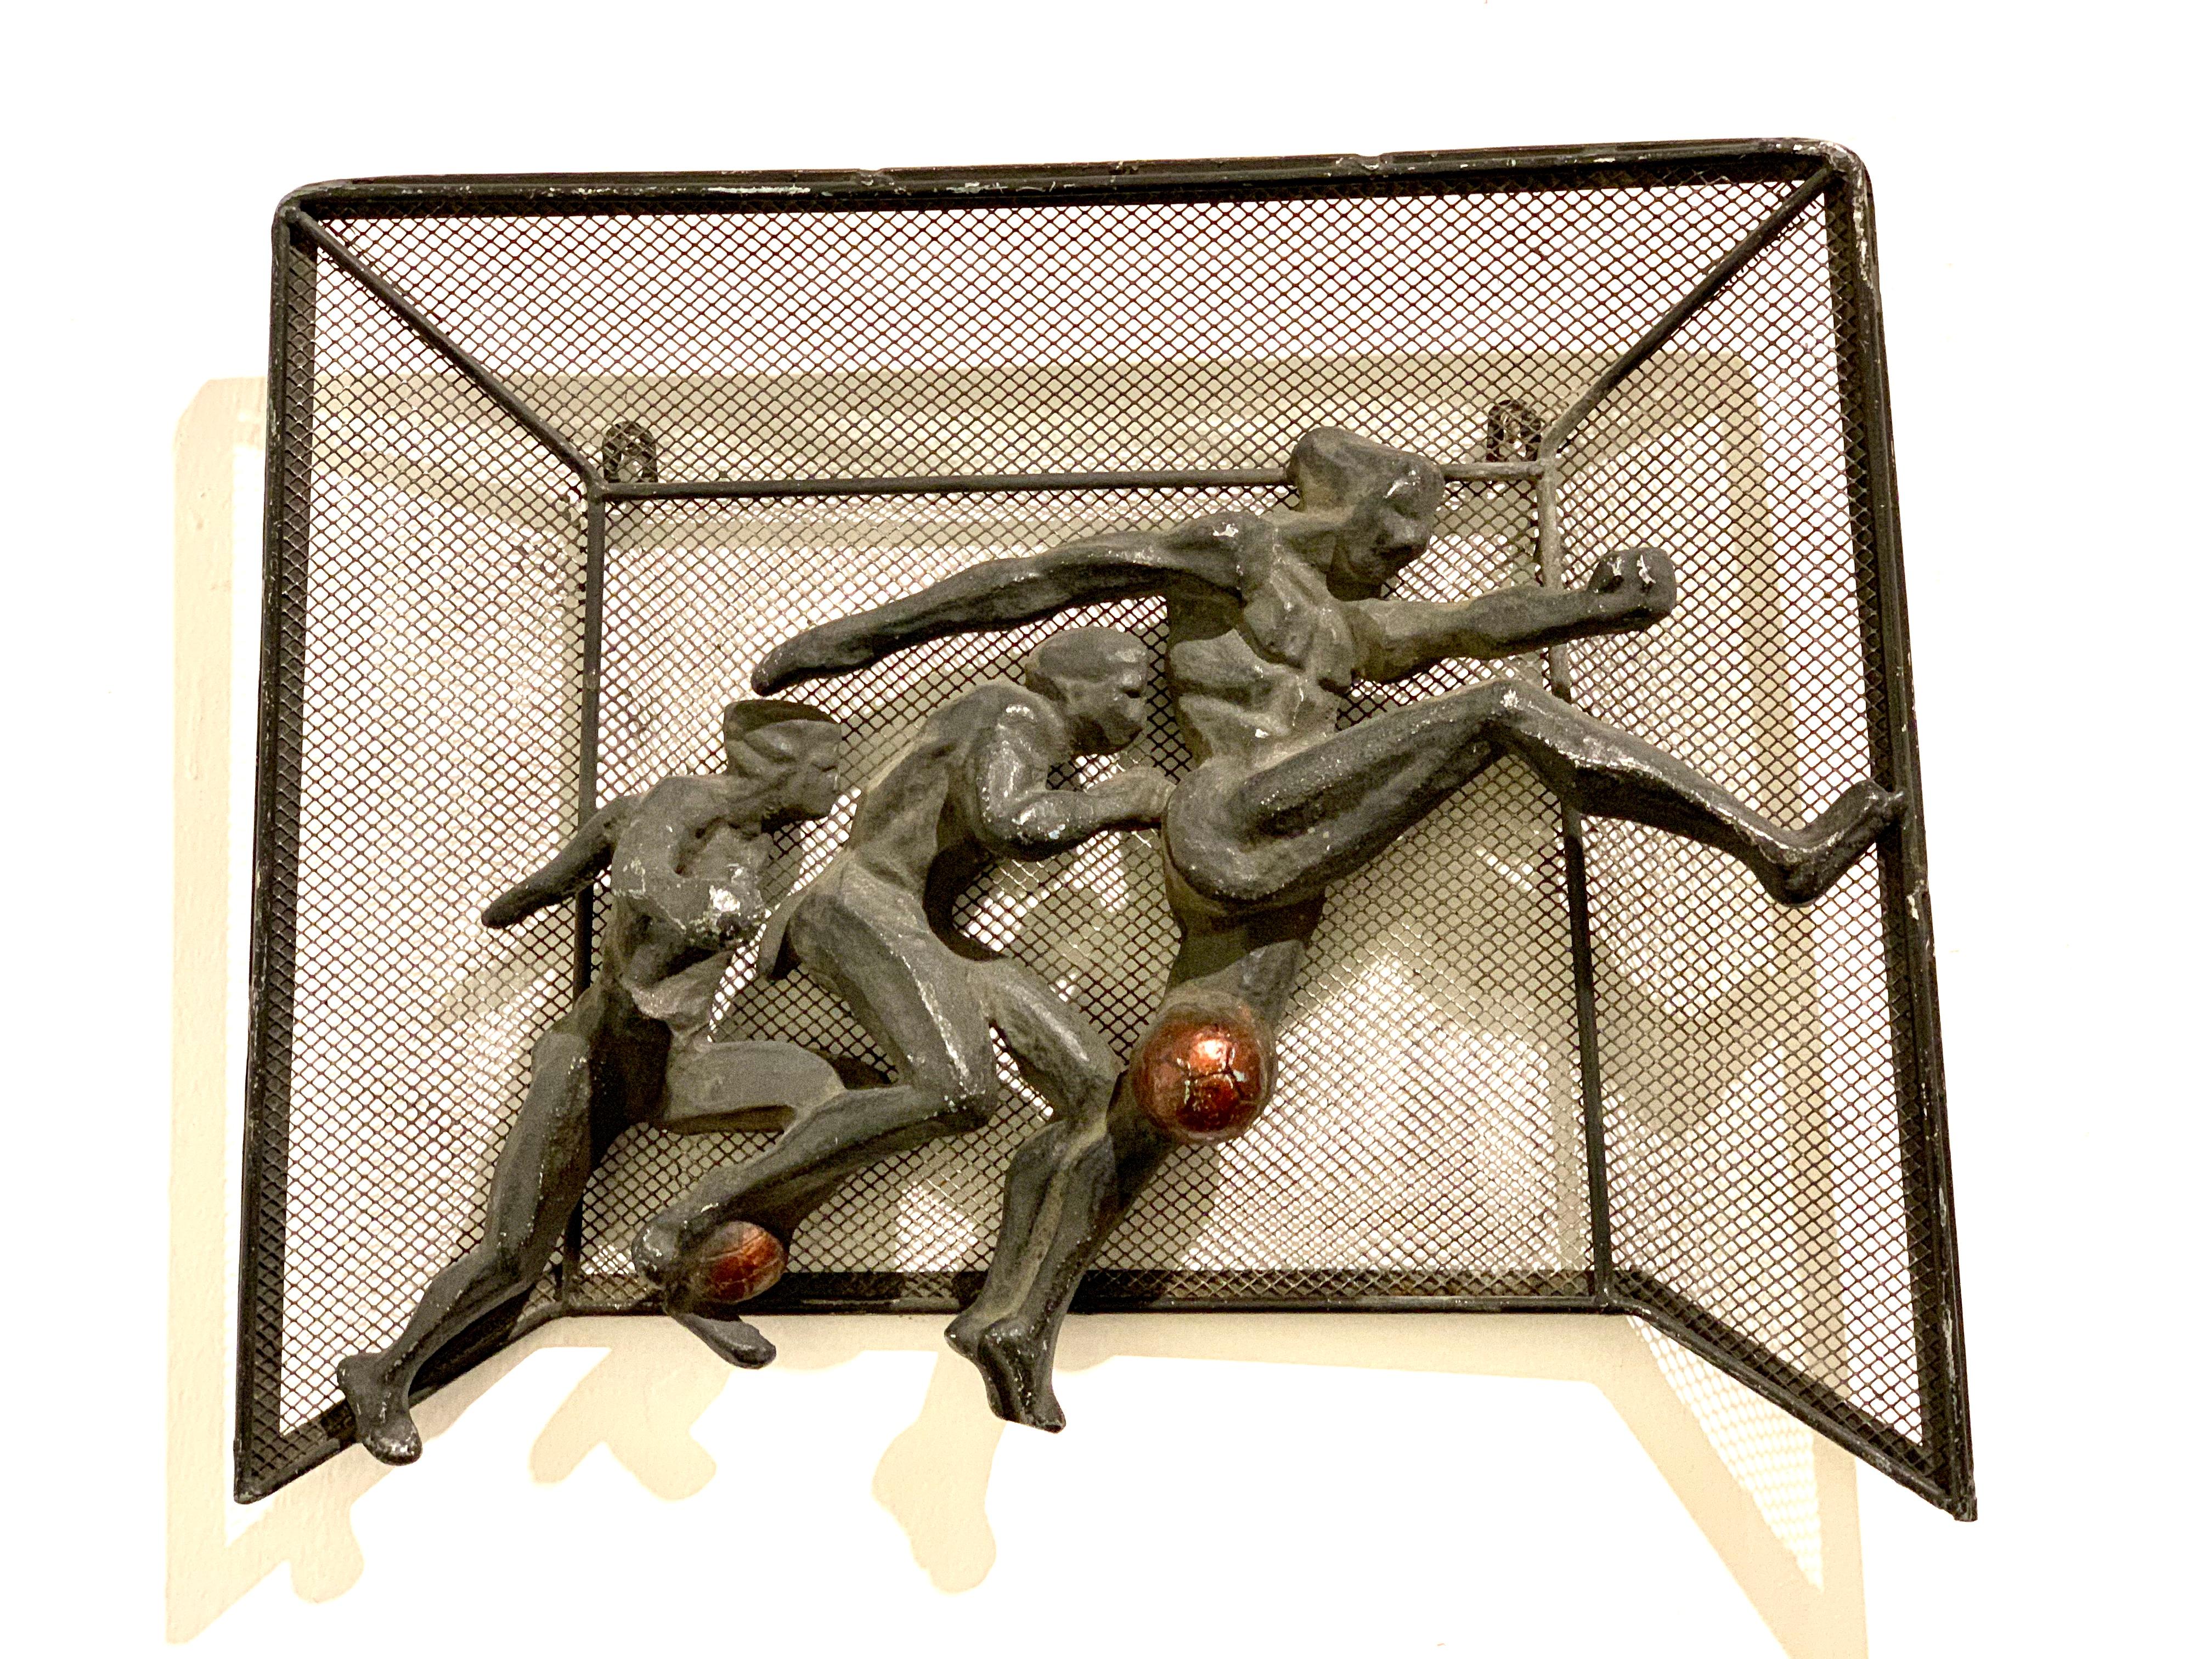 Brutalist football players metal wall art. Metal is dark, yet appears gray as there is no clear coat on the art work.